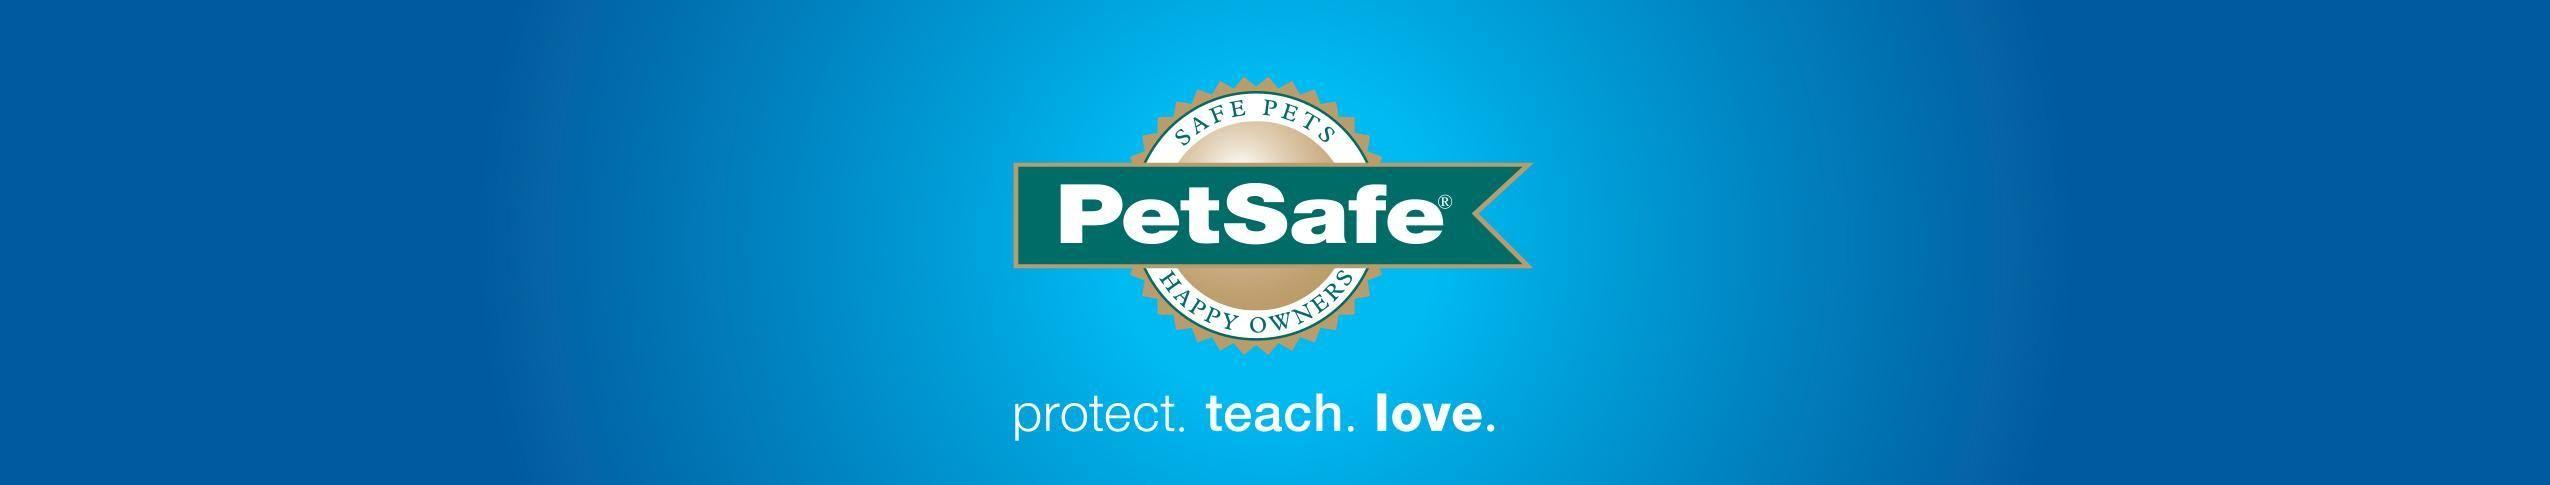 PetSafe Logo - PetSafe Wall Entry Pet Door with Telescoping Tunnel, Pet Door for Dogs and  Cats, Available in Small, Medium and Large